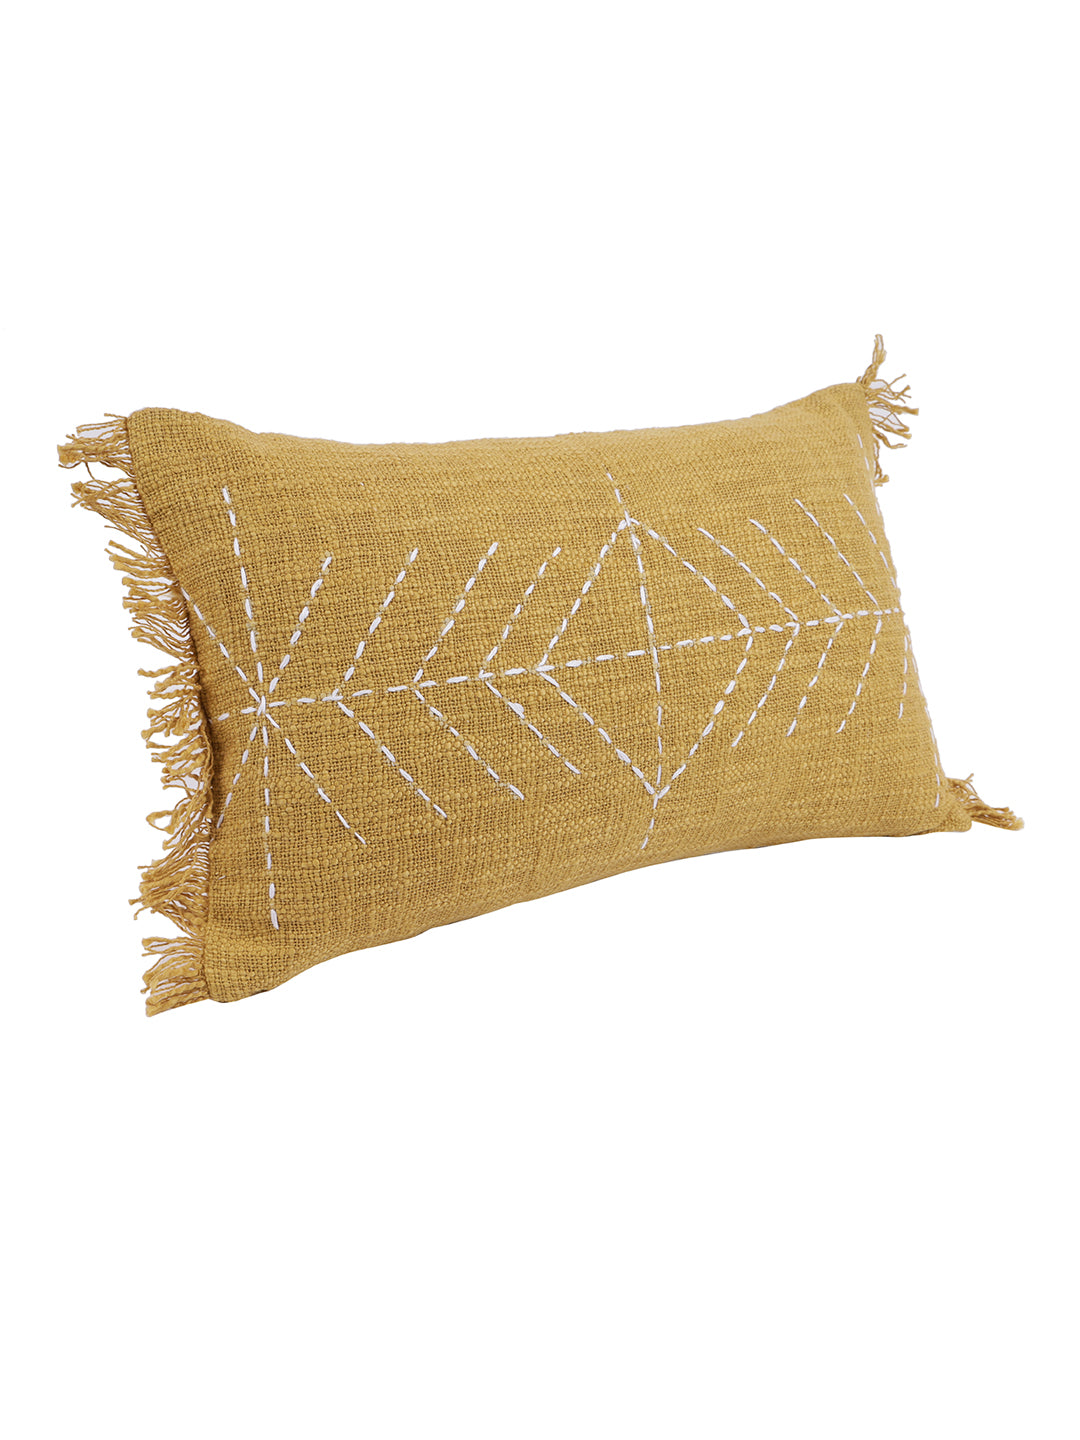 Set of 2 Mustard color Lumbar Cushion Cover with Fringes